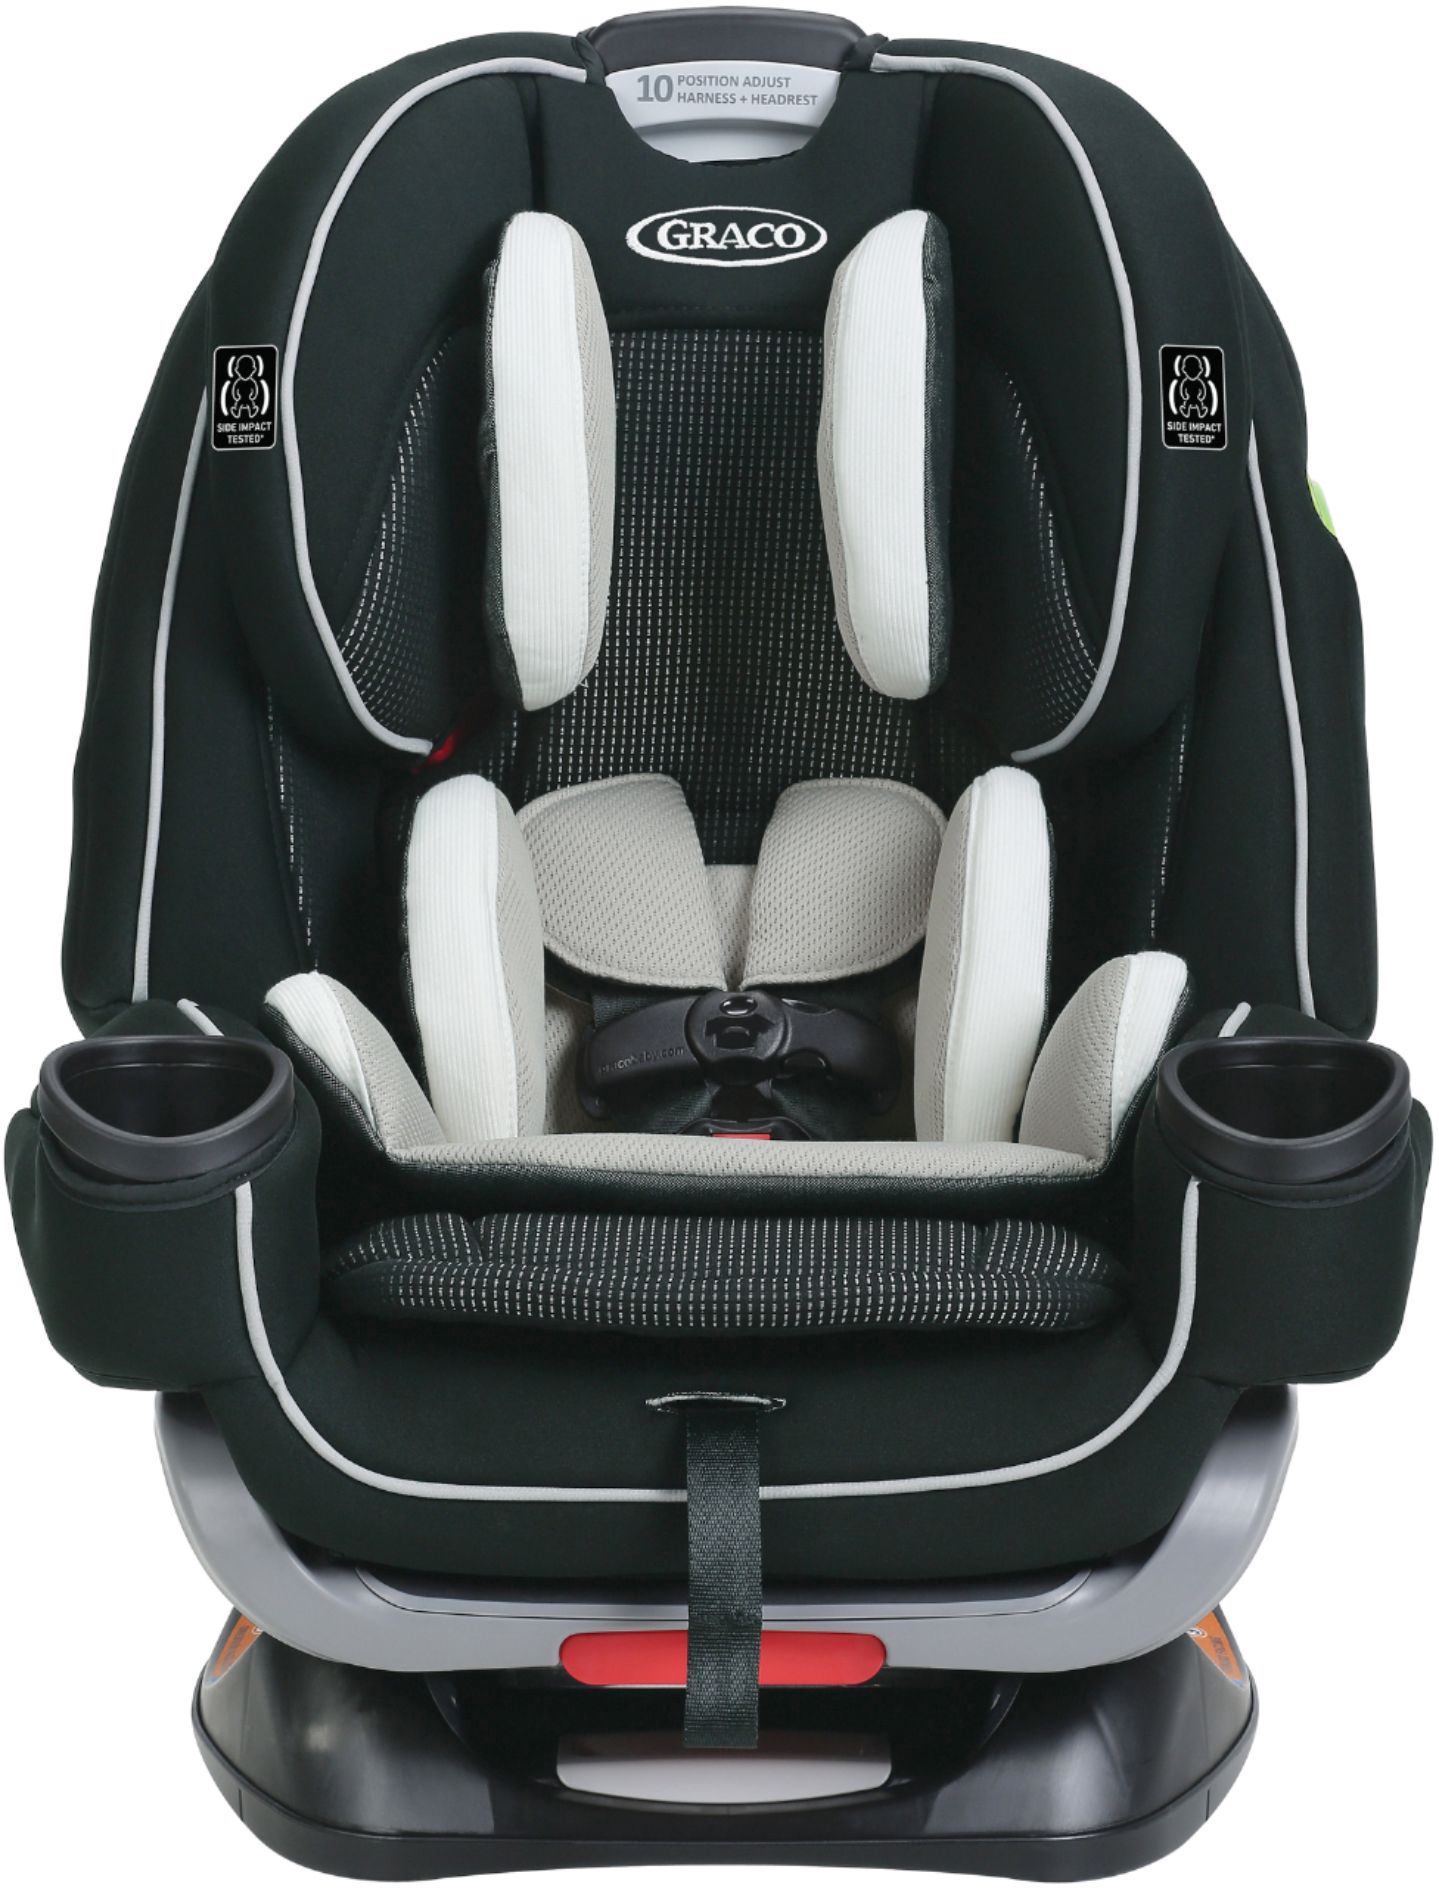 Graco 4Ever Extend2Fit 4-in-1 Car Seat Clove 2001871 - Best Buy